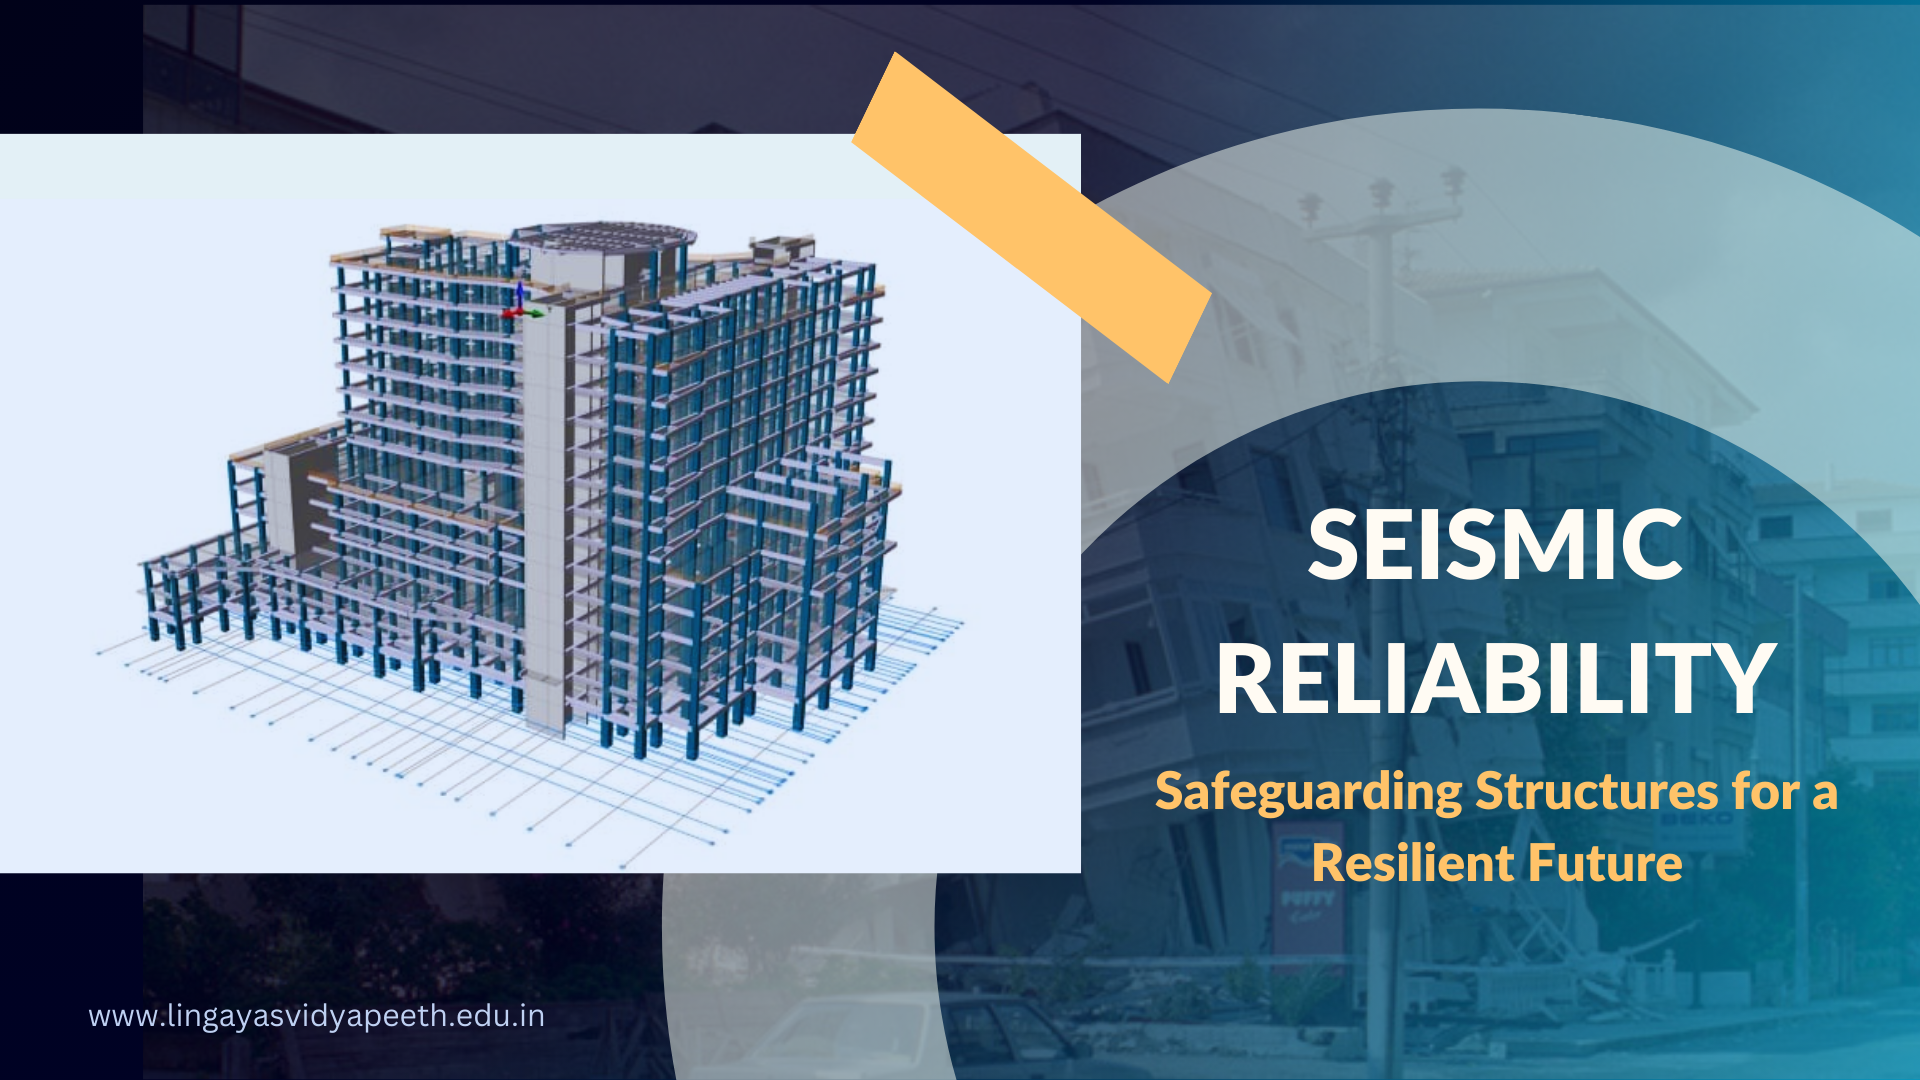 How Does Seismic Reliability Protect Critical Structures?